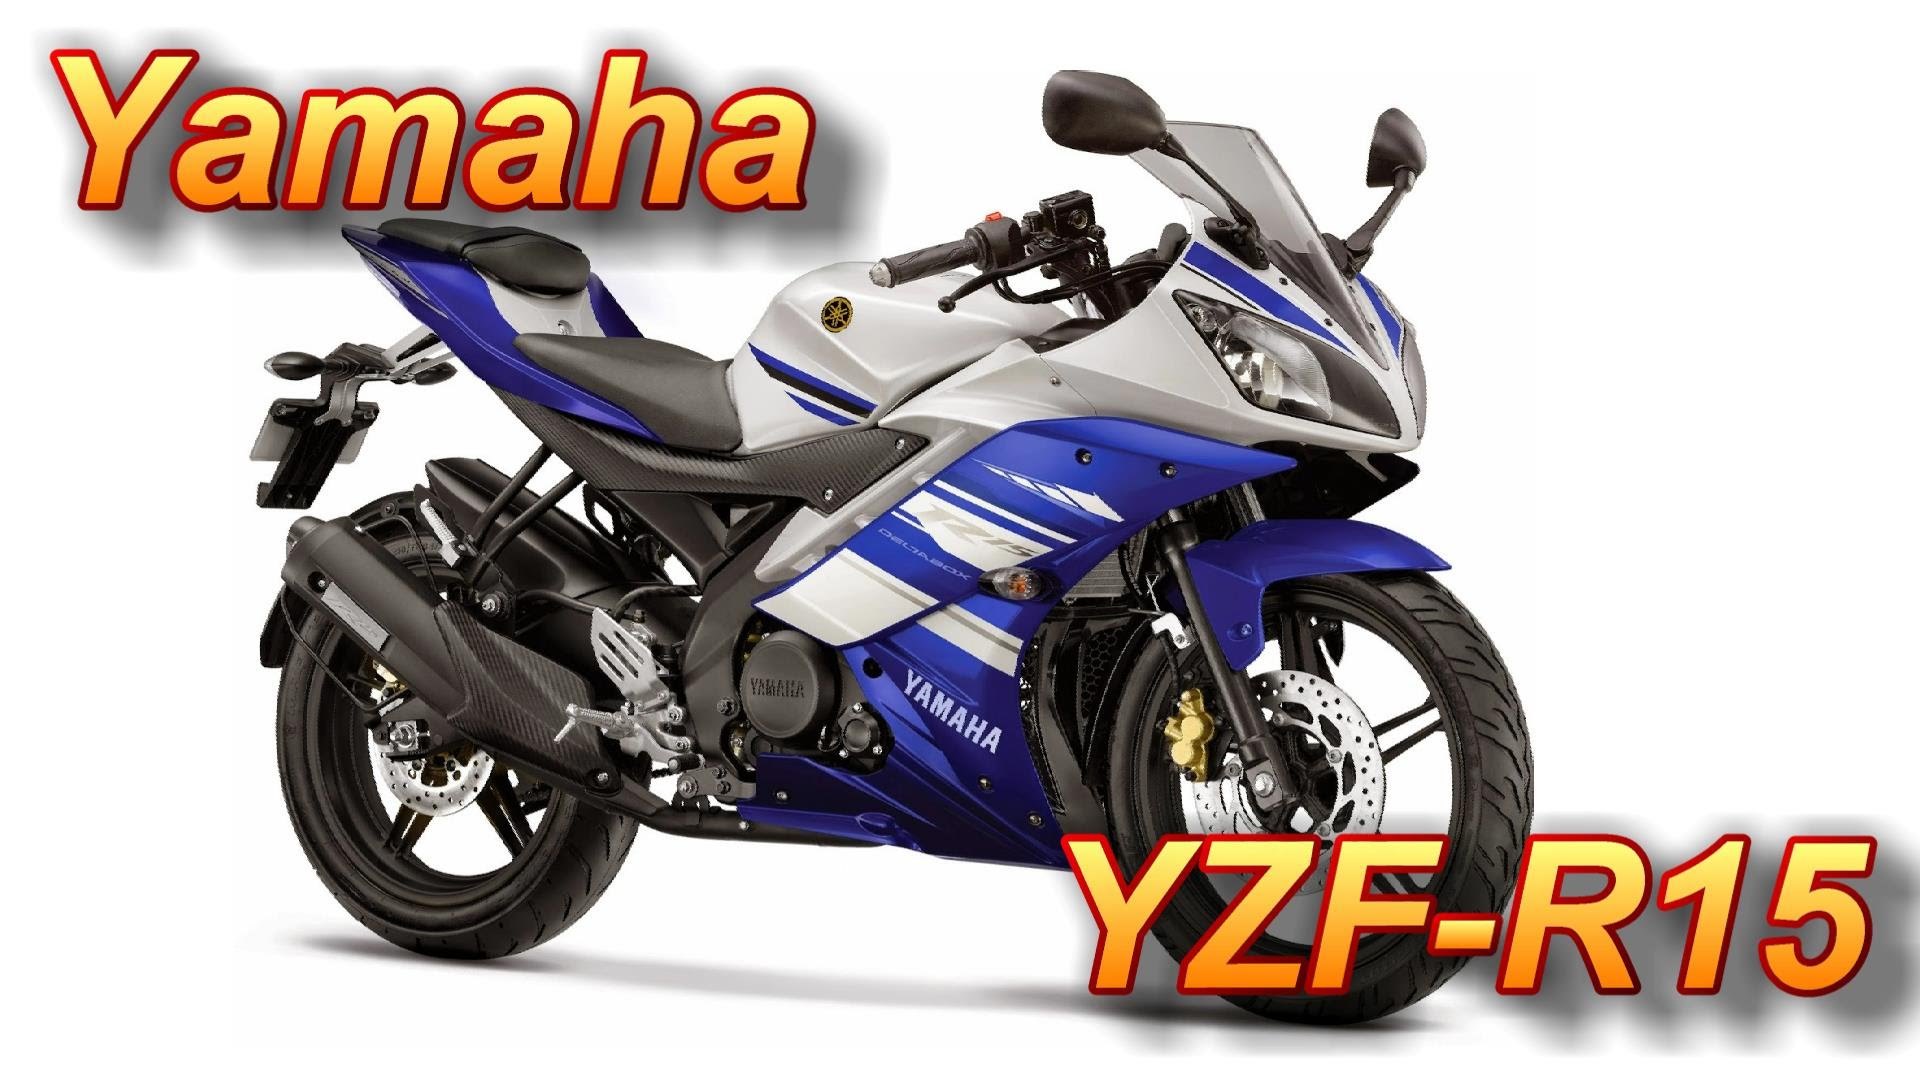 2017 Yamaha Yzf R15 V3 0 Bookings Commence In India